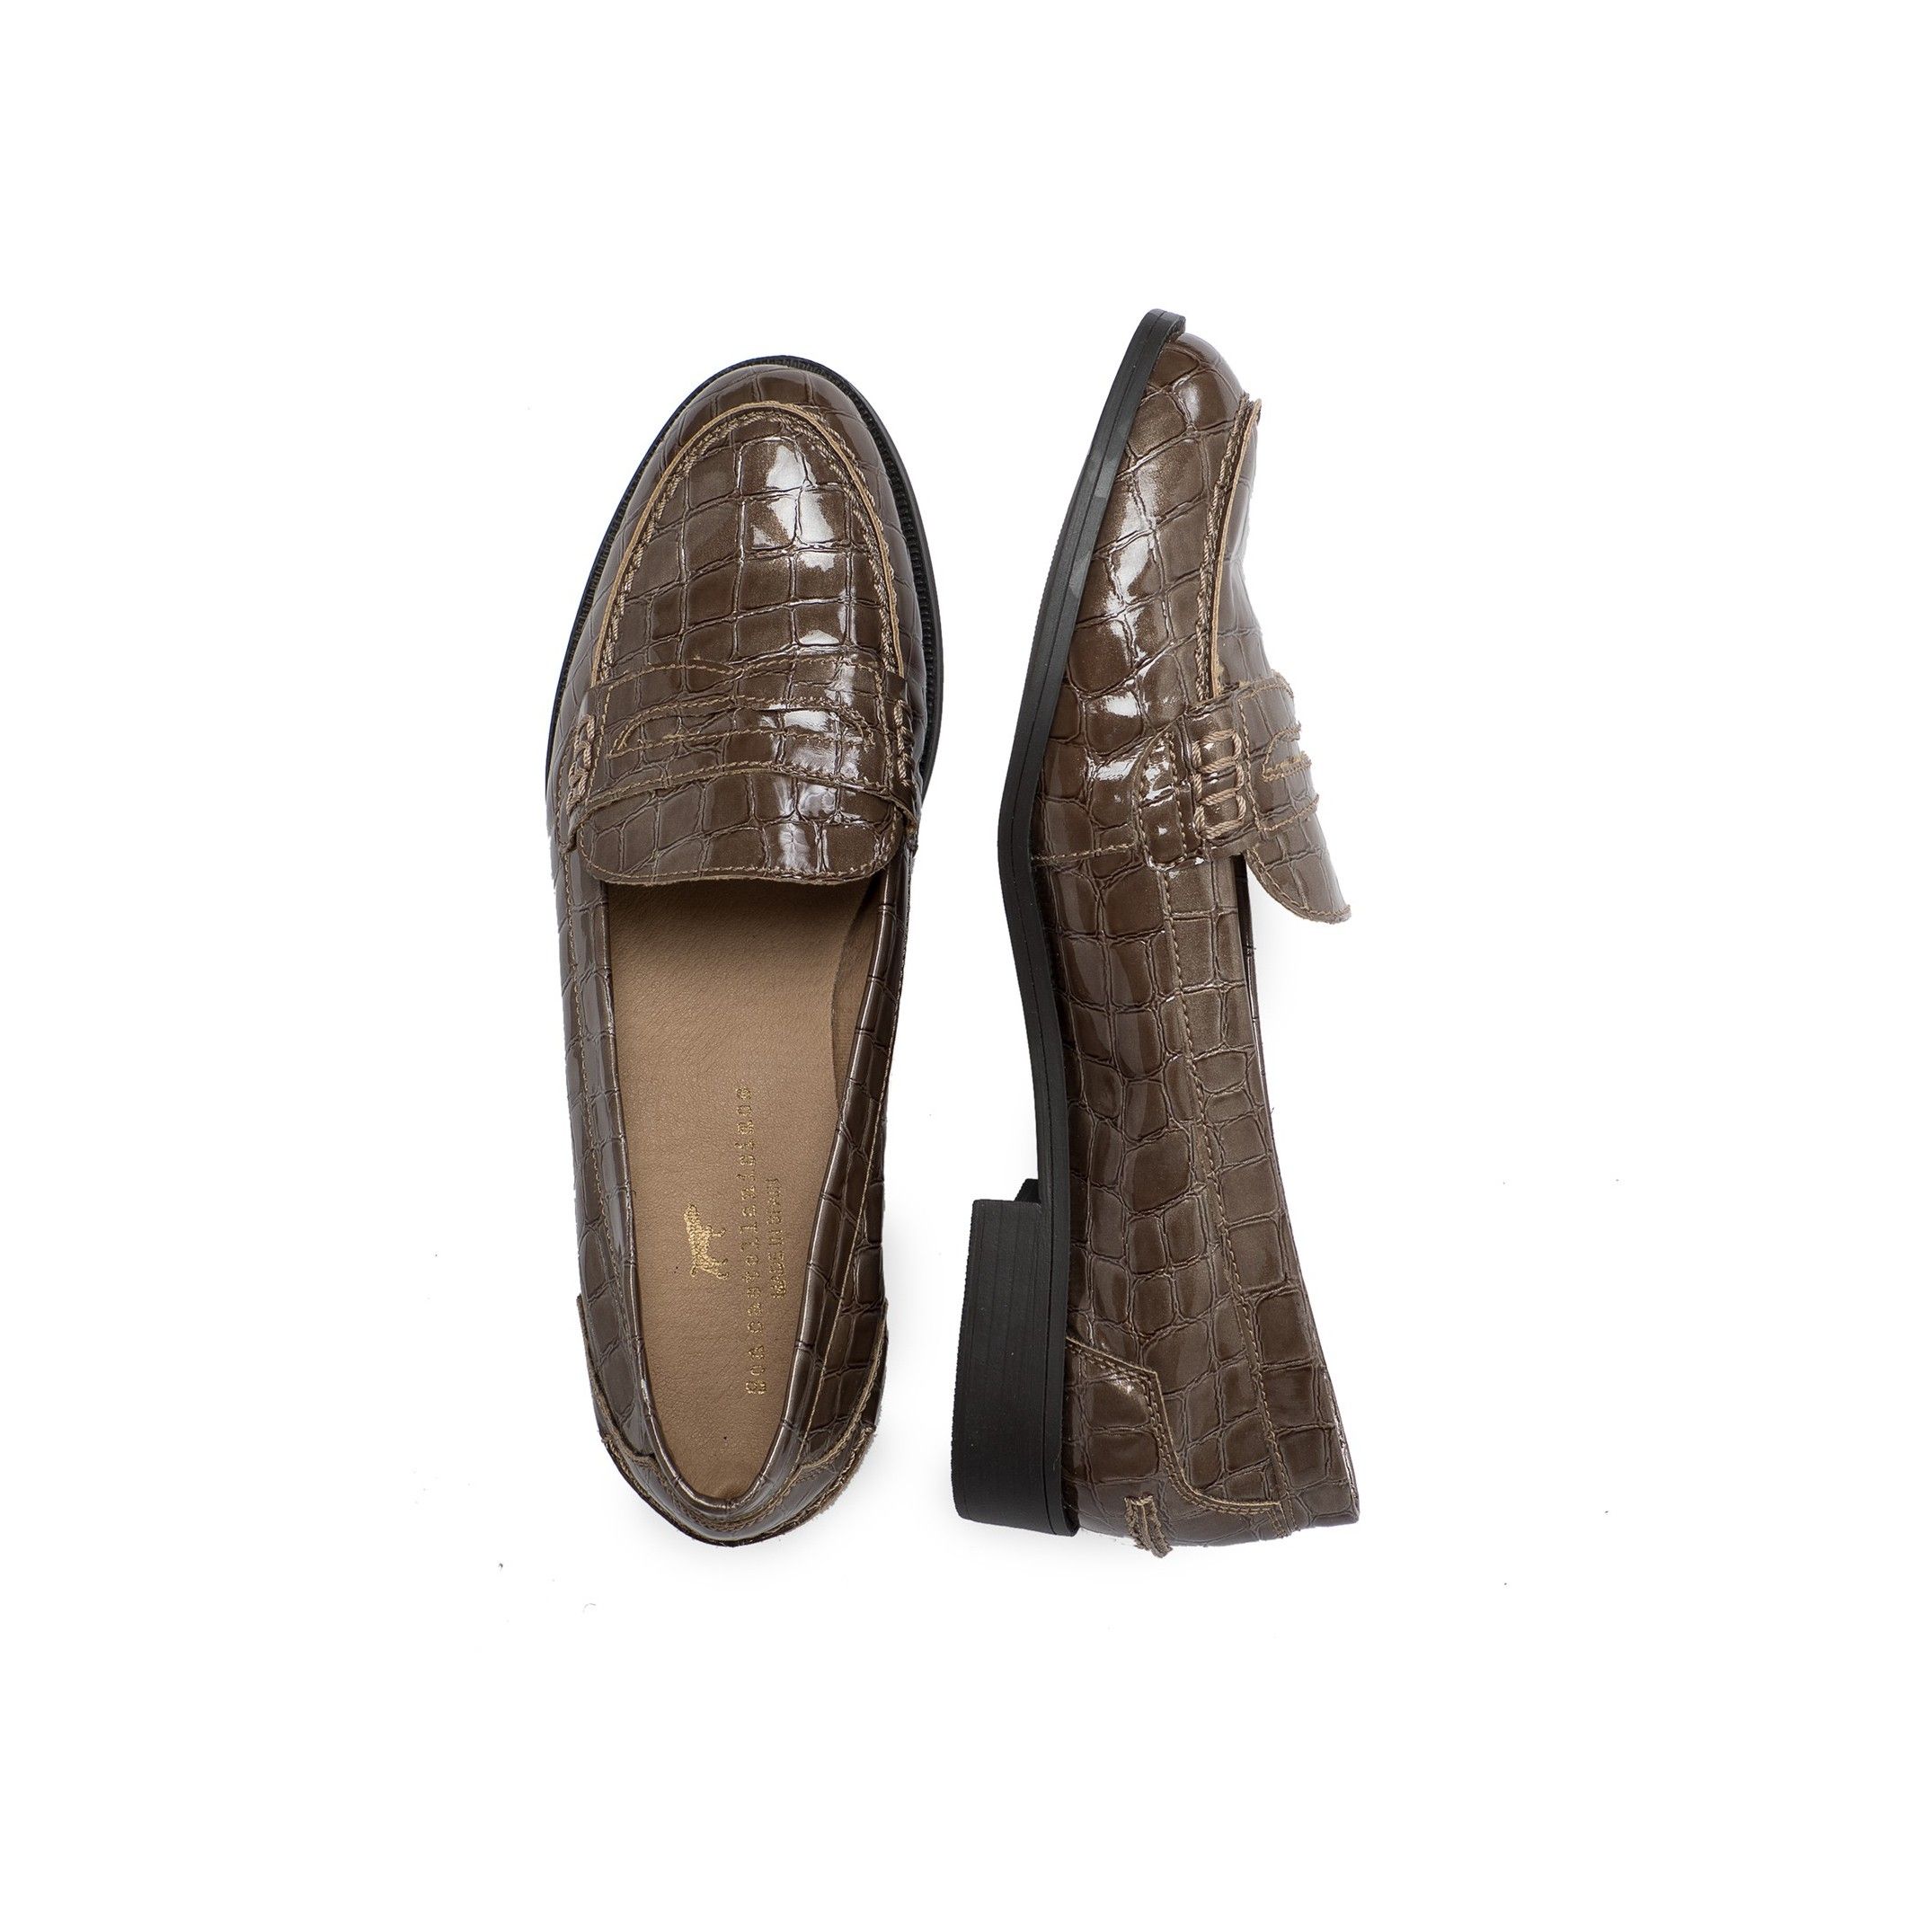 Loafers with mask for women, by Son Castellanisimos. Upper made of leatherette. Inner lining and insole: Antiallergic and keeps the inside of the footwear dry. Sole material: synthetic and non slip. Heel height: 2 cm. Designed and made in Spain.